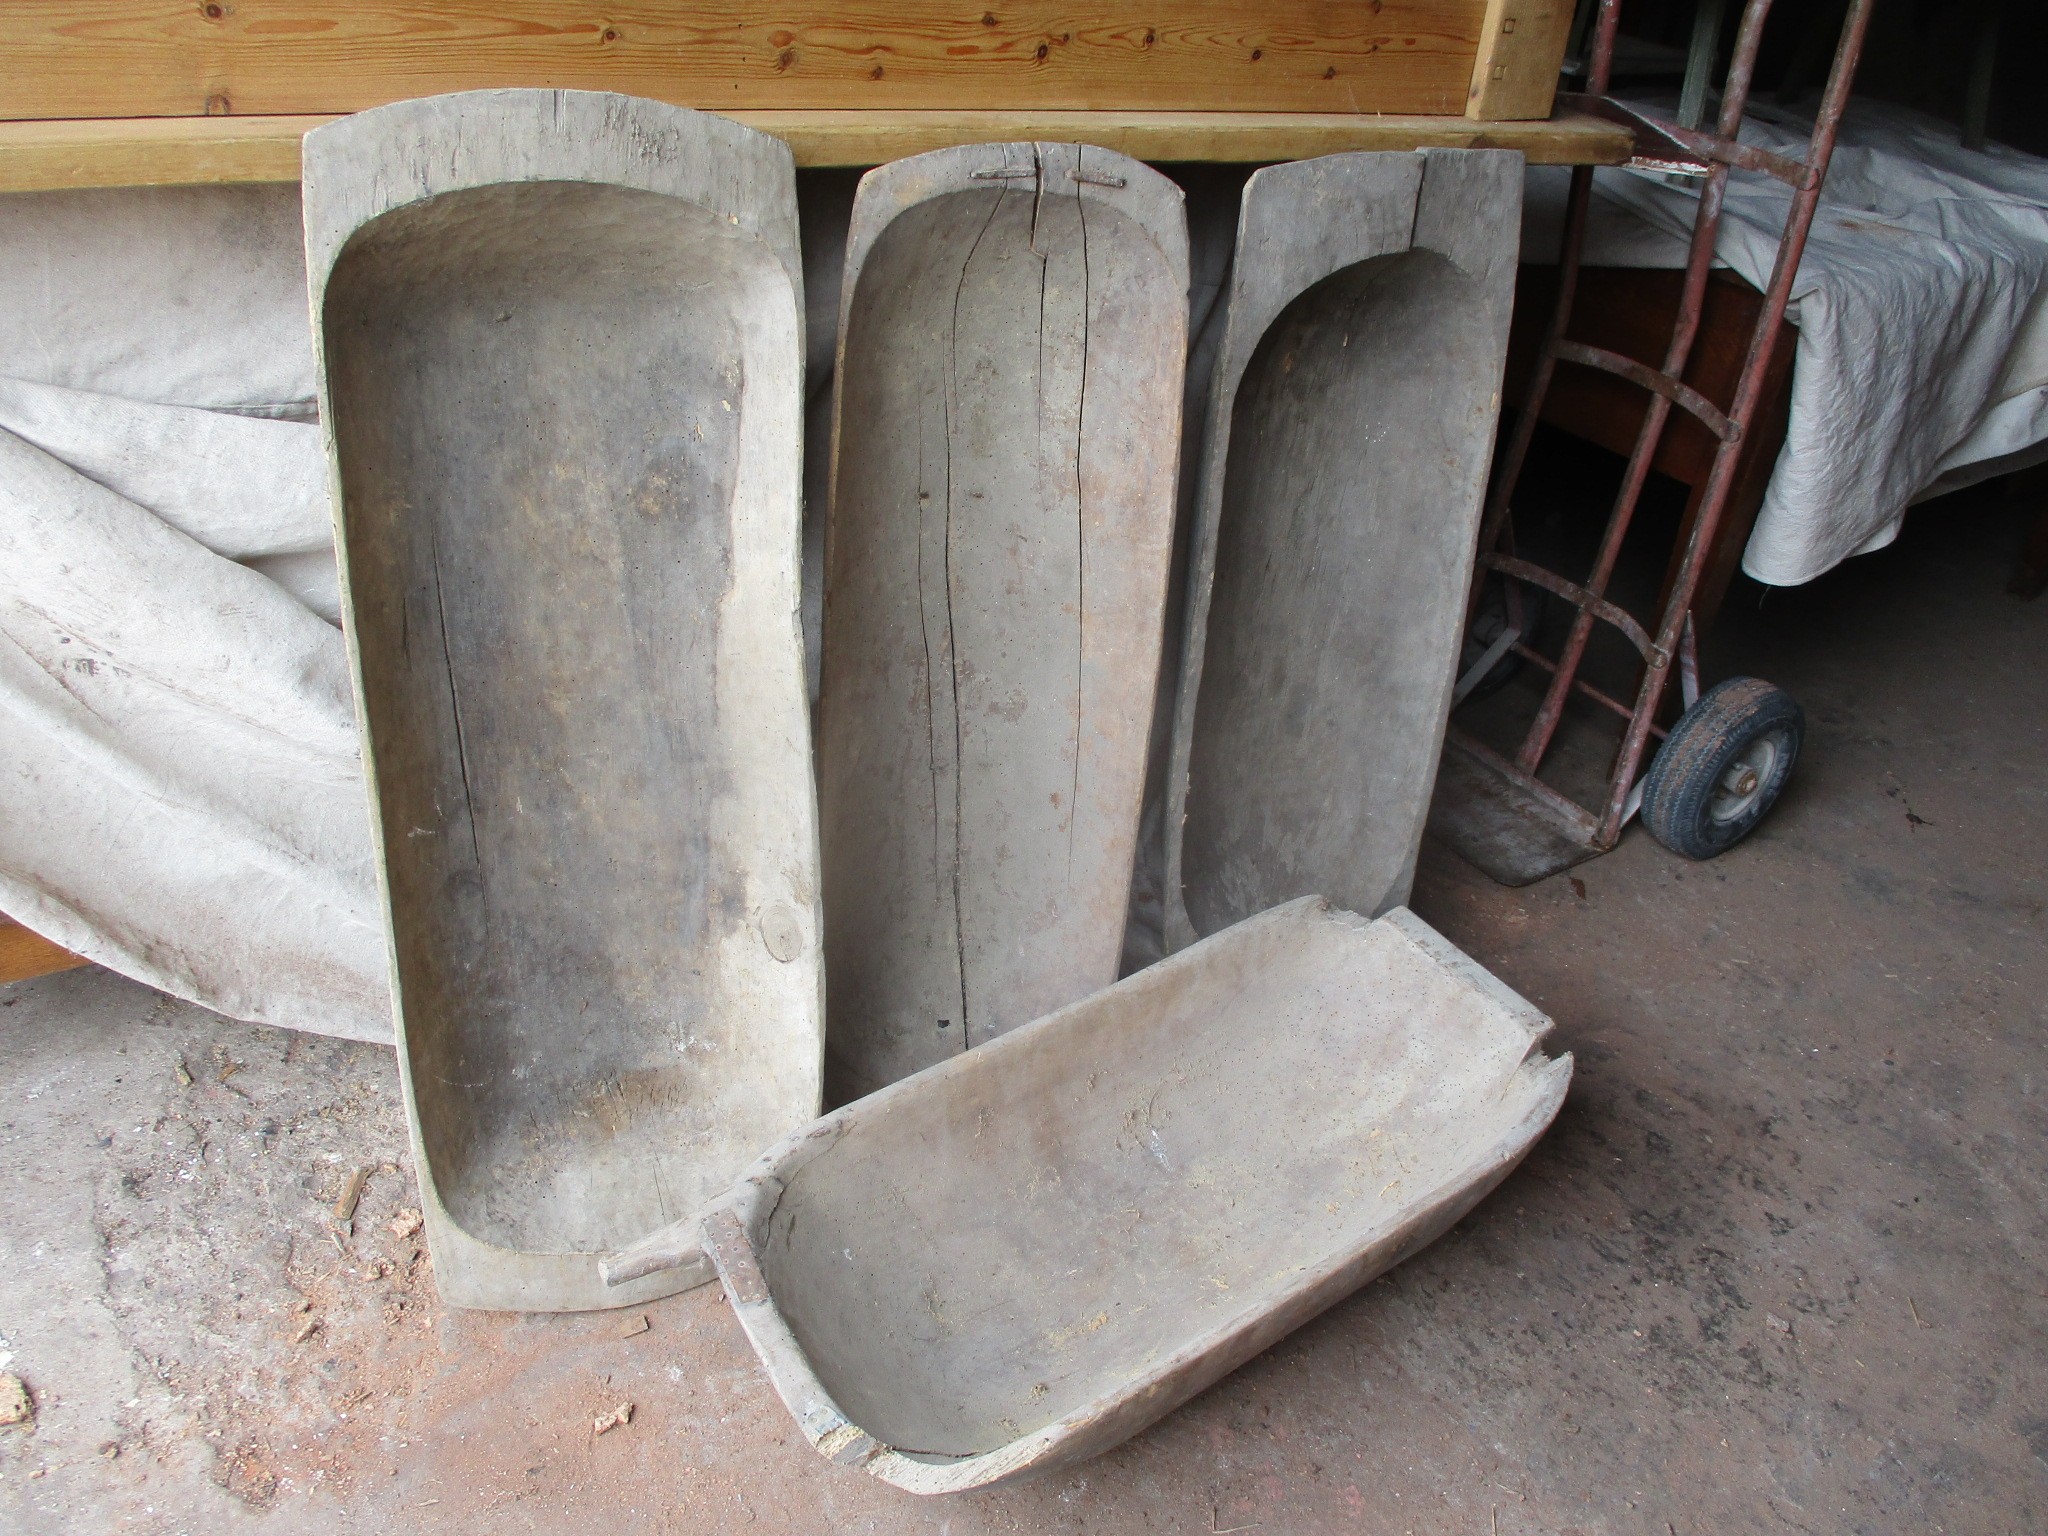 Carved rustic dough trugs or bowls